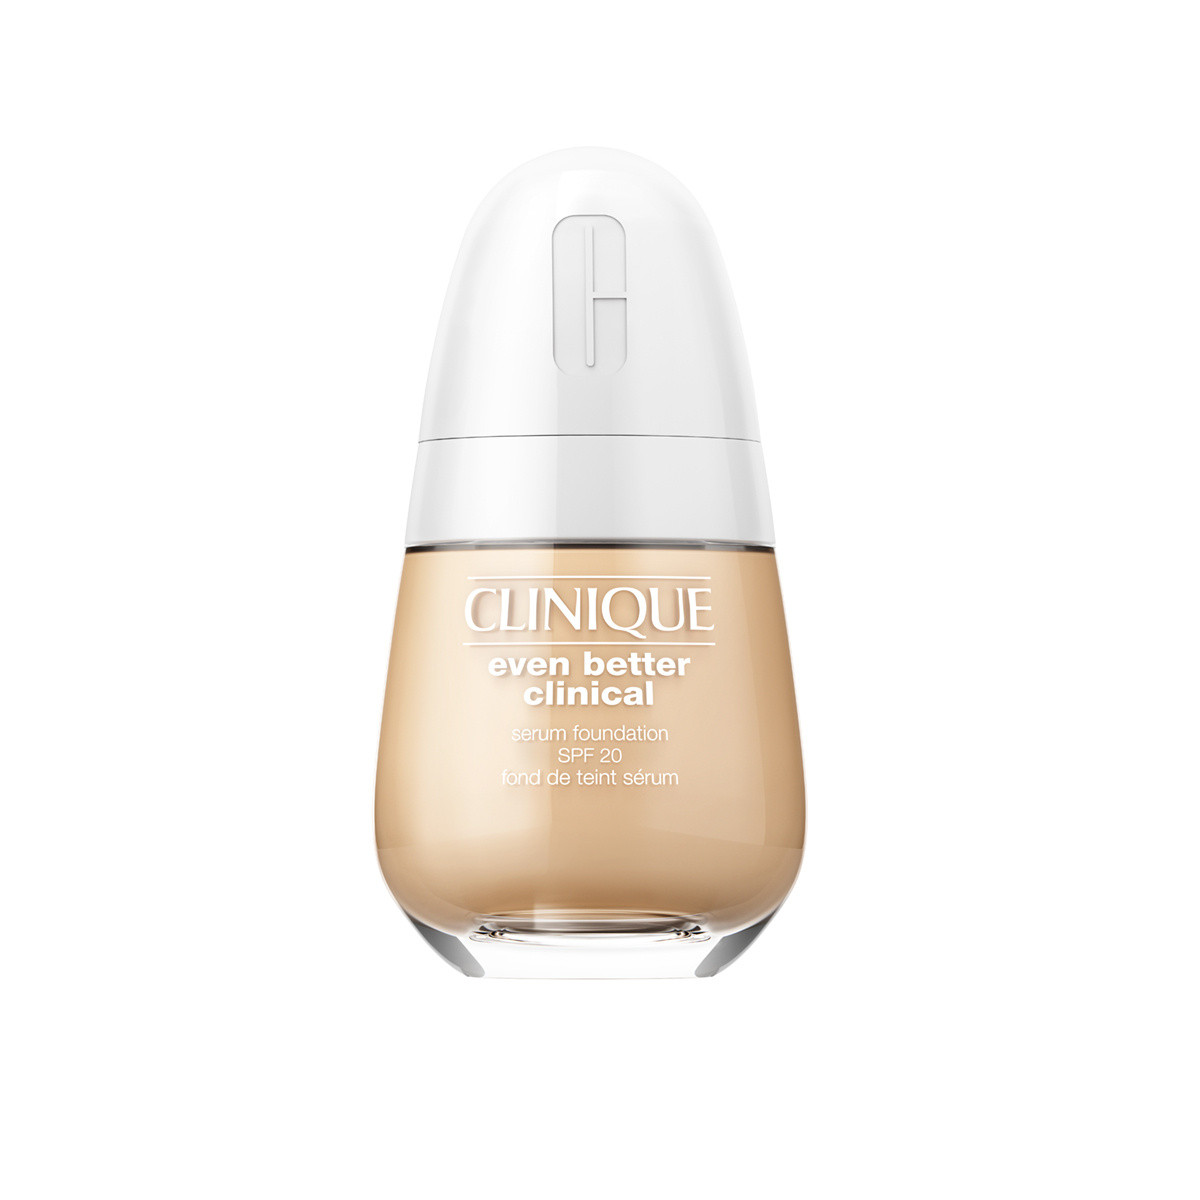 CLINIQUE EVEN BETTER CLINICAL™ SERUM FOUNDATION BROAD SPECTRUM   SPF 25 - CN 52 NEUTRAL 30 ML, CN 52 NEUTRAL, large image number 0